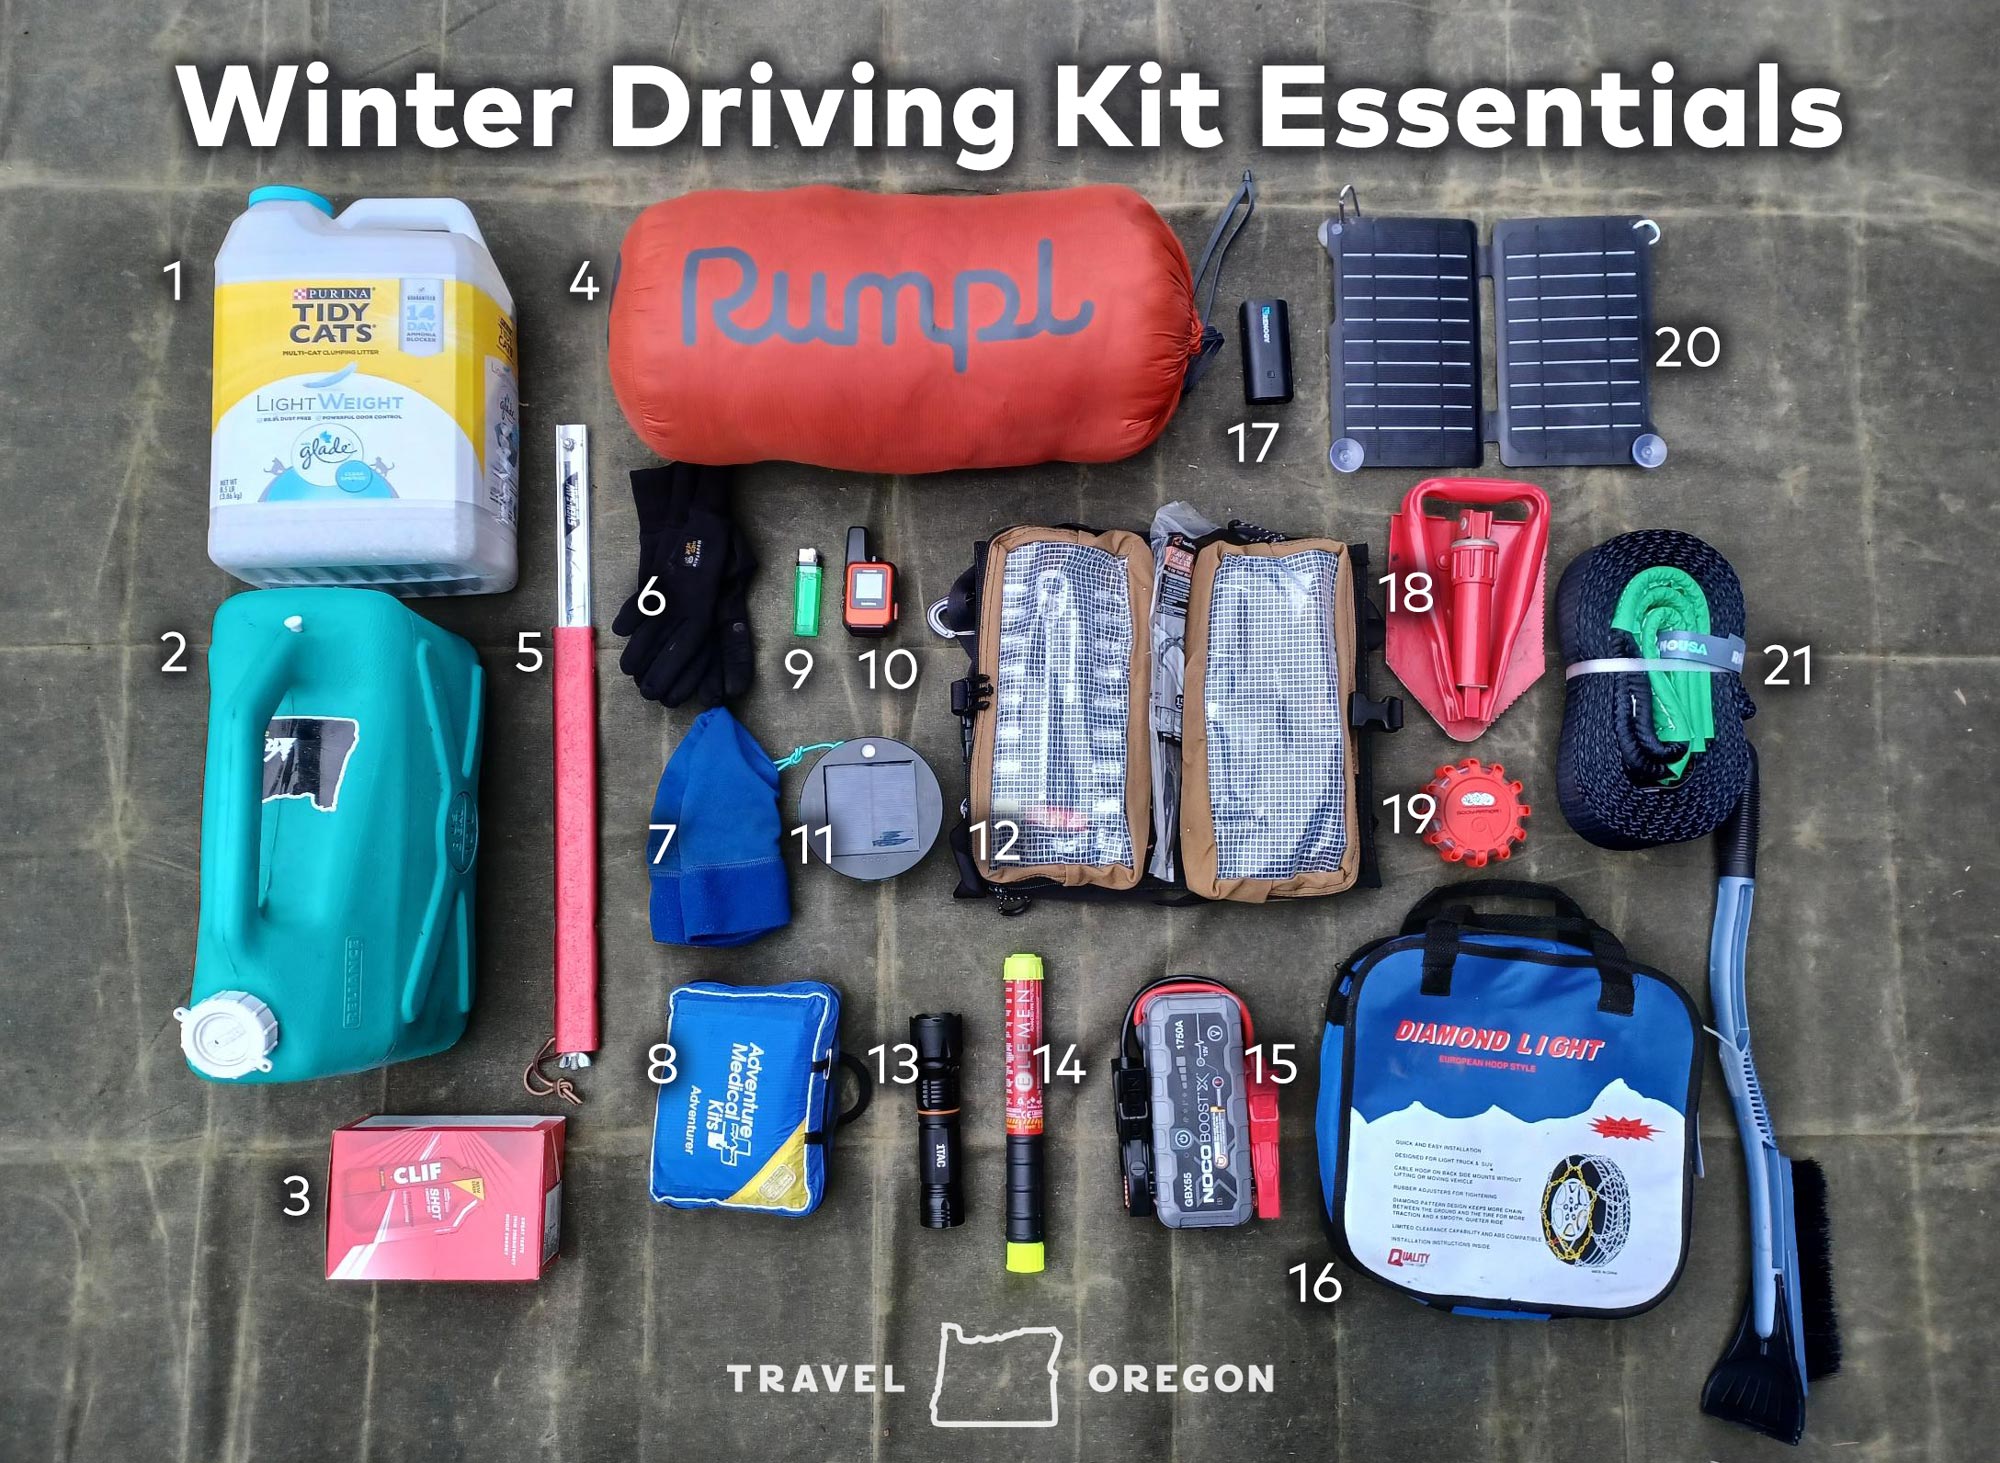 Items to pack for a winter car kit: 1) kitty litter (for traction); 2) 3 gallons of water; 3) Extra food; 4) Blanket; 5) Folding saw (for downed trees); 6) Fleece gloves; 7) Fleece beanie; 8) First Air kit; 9) Lighter; 10) Satellite texting/sos device; 11) Solar lantern; 12) Toolkit; 13) Flashlight; 14) Fire extinguisher; 15) Portable jump starter; 16) Tire chains; 17) USB battery; 18) Collapsible shovel; 19) Road flares; 20) Solar panel for charging devices; 21) Tow rope; 22) Ice and snow scraper